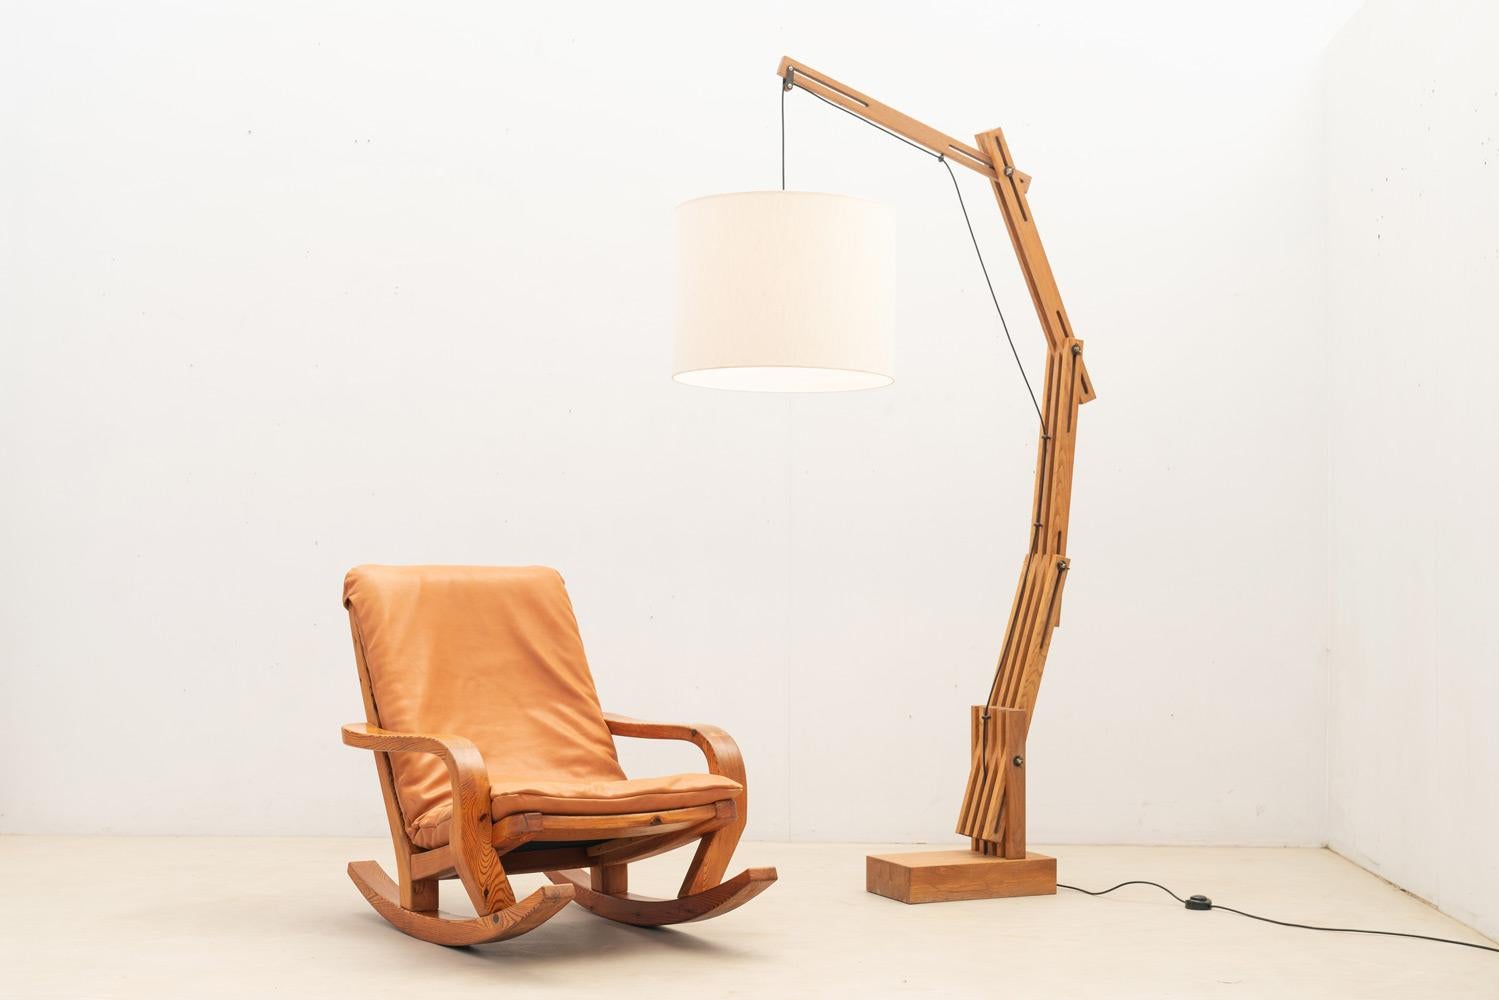 Crafted in 1970s France, this large articulated floor lamp by Daniel Pigeon combines wood's warmth with modern design. Its adjustable structure offers versatility, directing light precisely. 

Shade diameter : 53cm

2 floor lamp available.
Price for